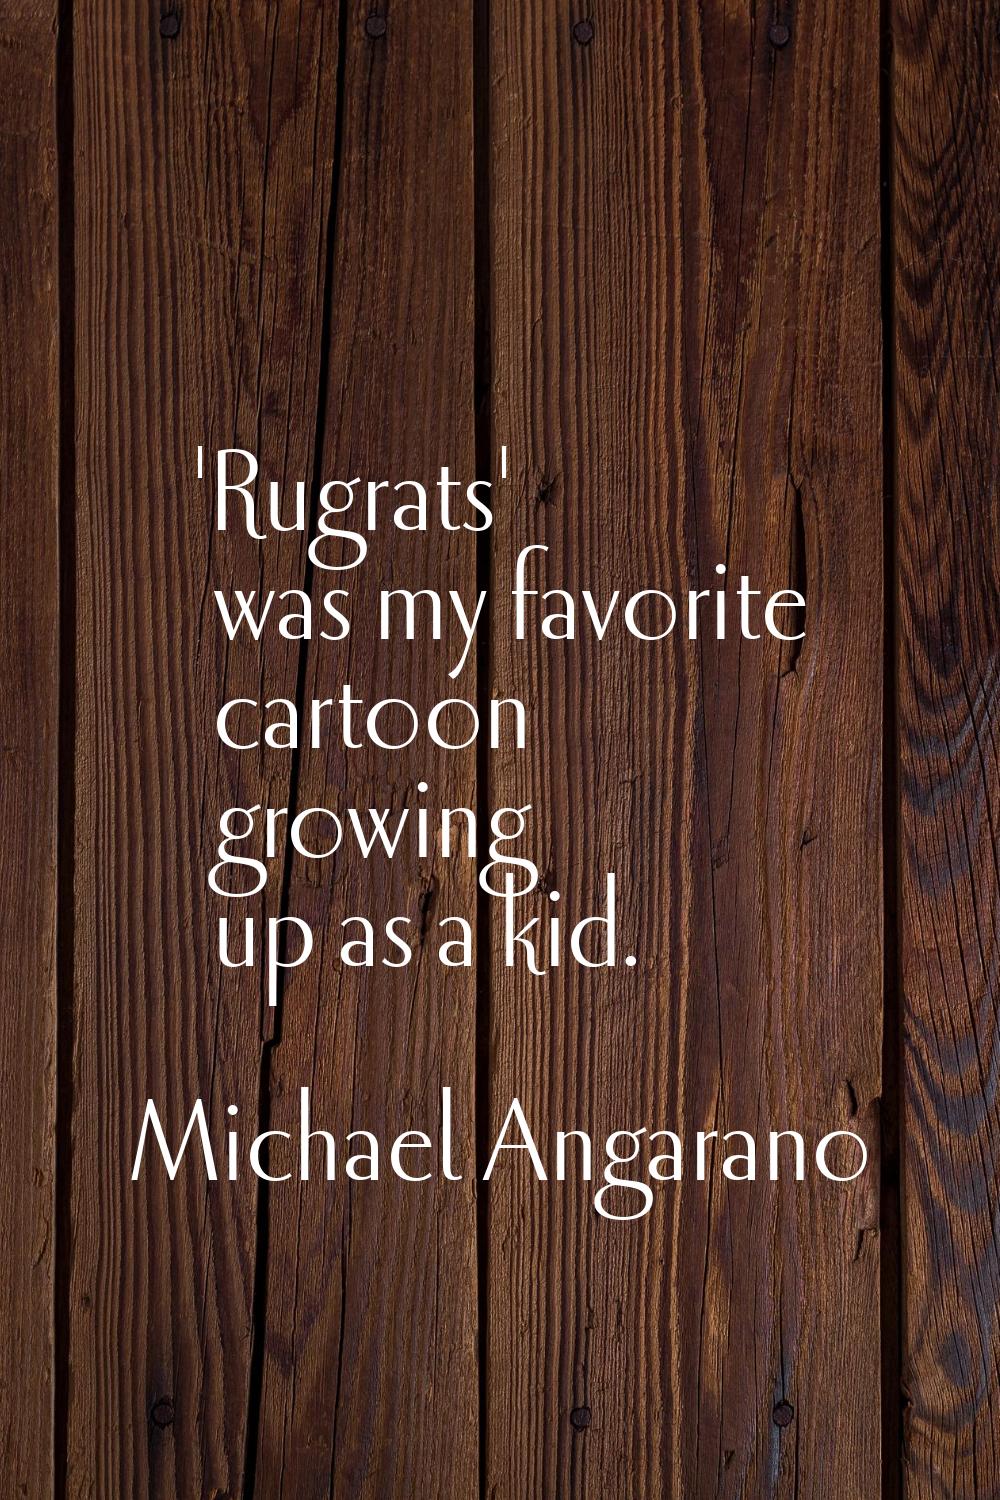 'Rugrats' was my favorite cartoon growing up as a kid.